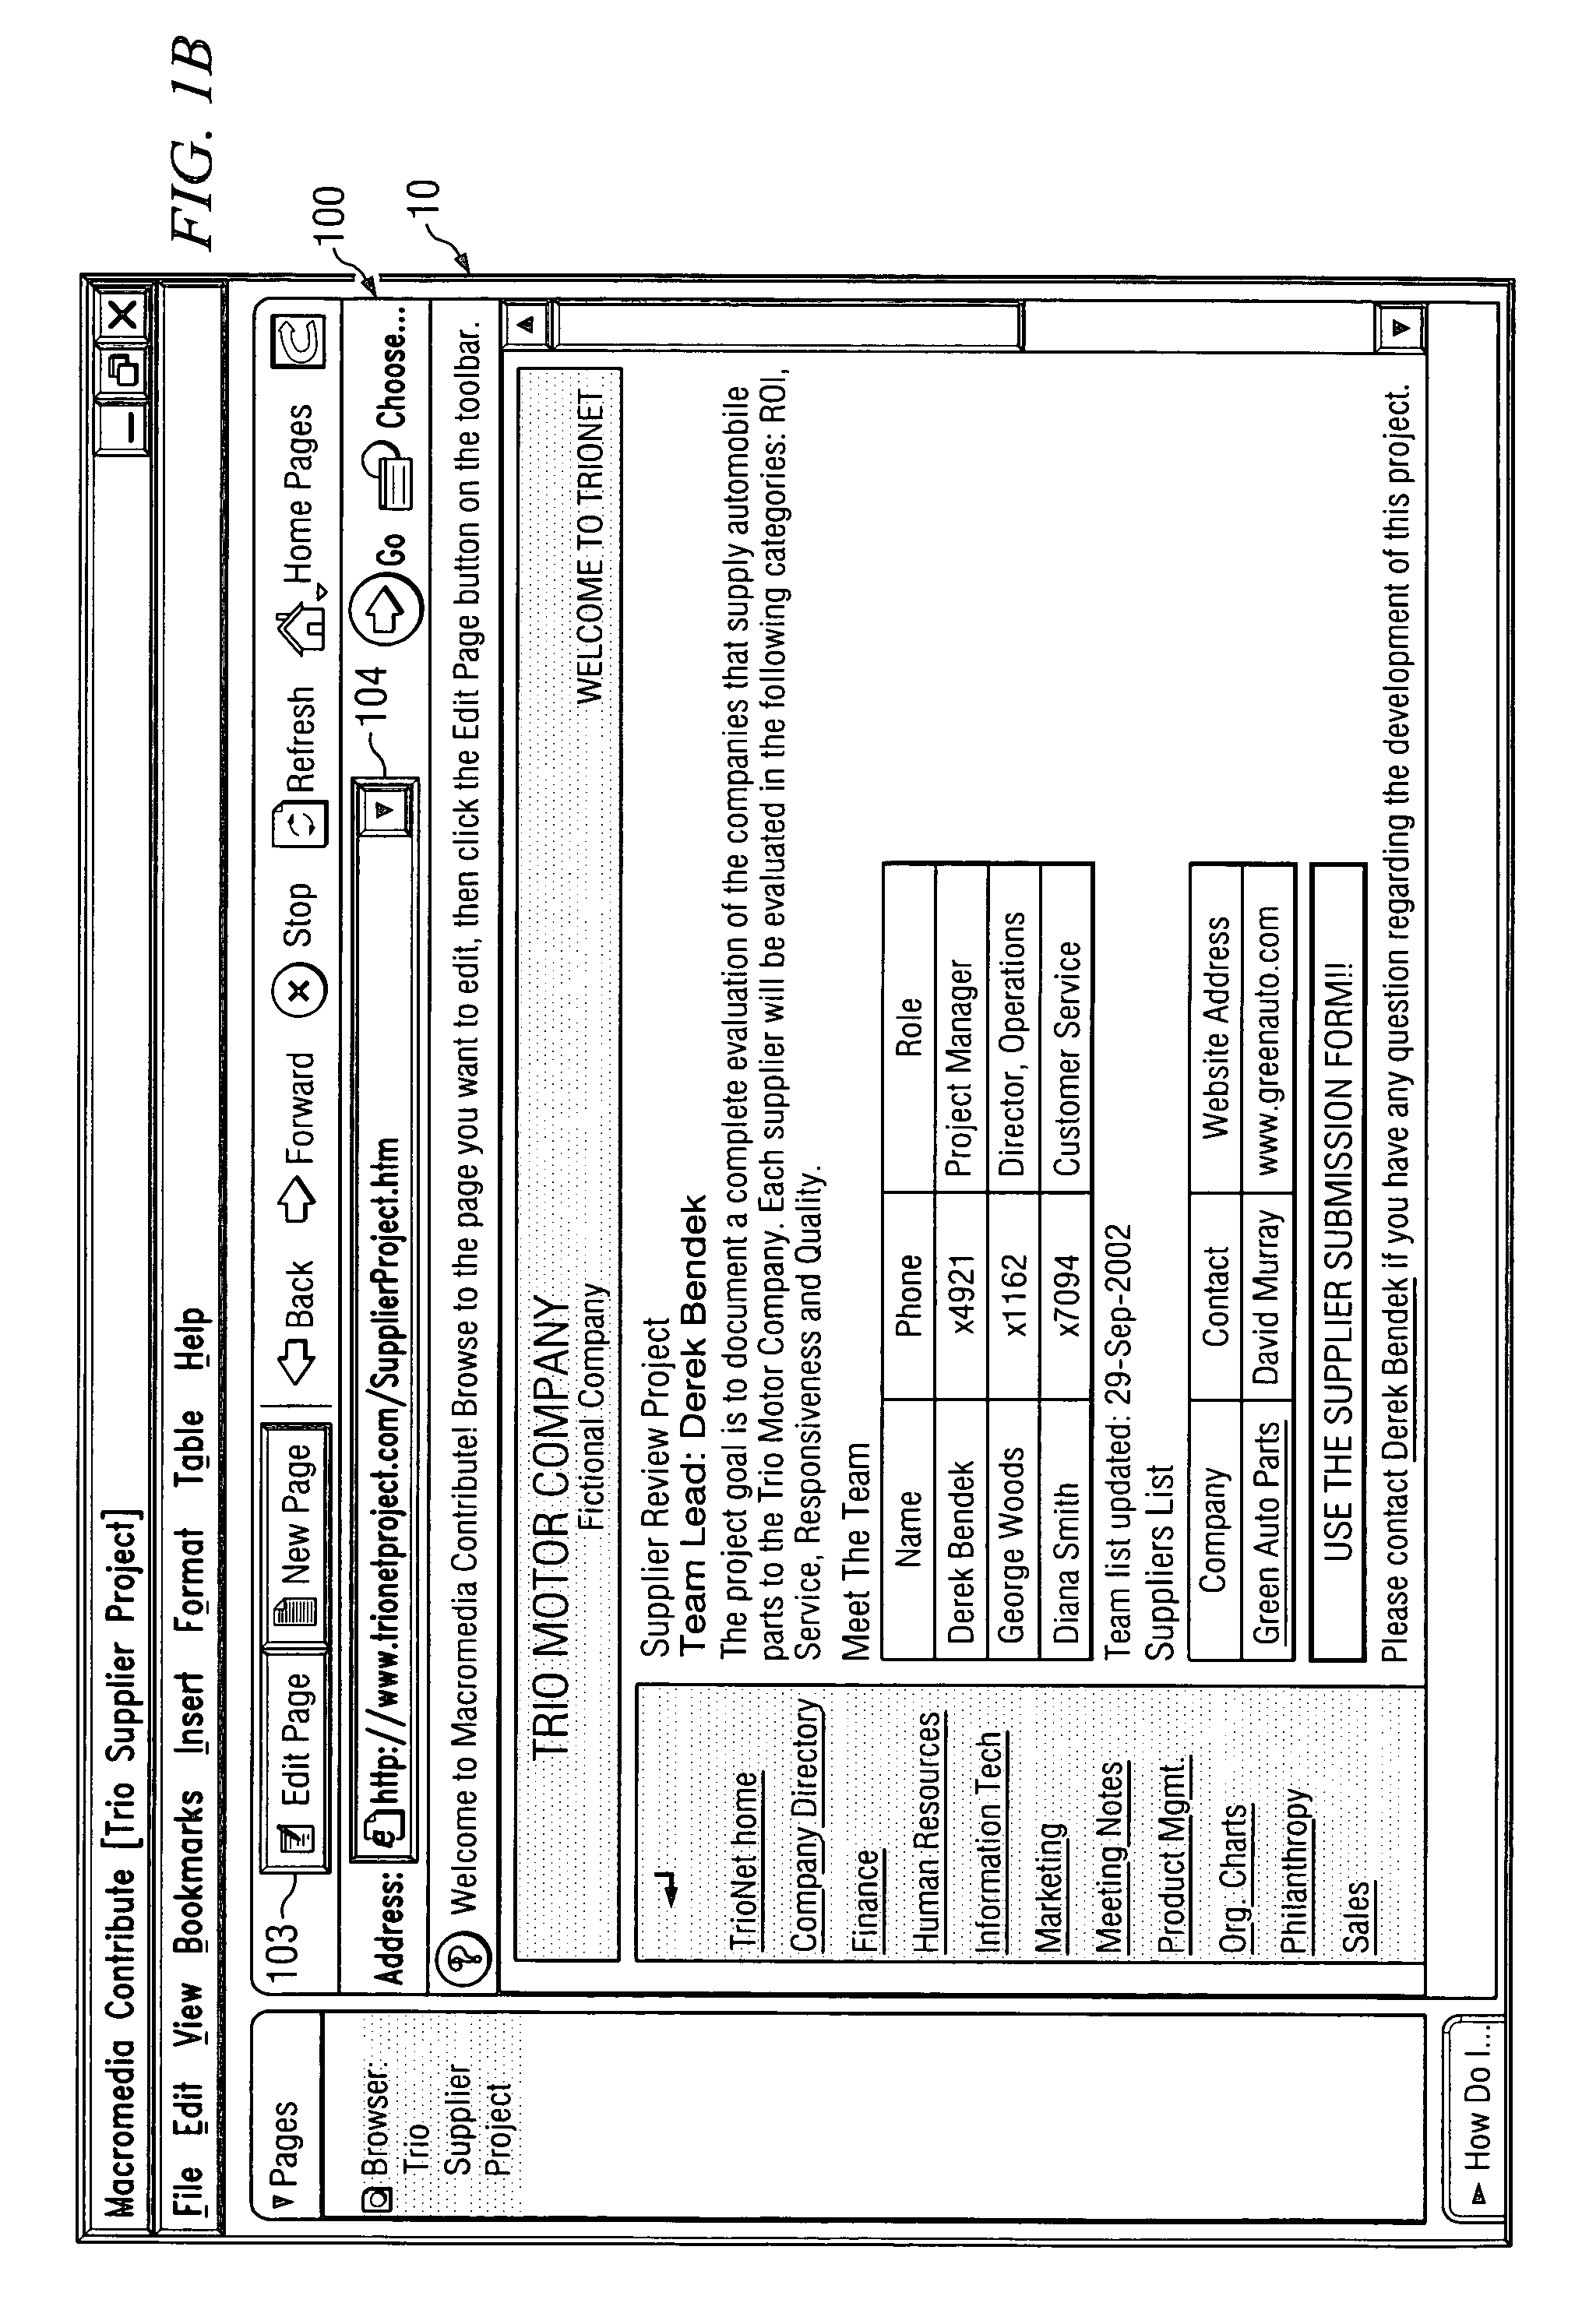 Systems and methods for web site editing interfaces